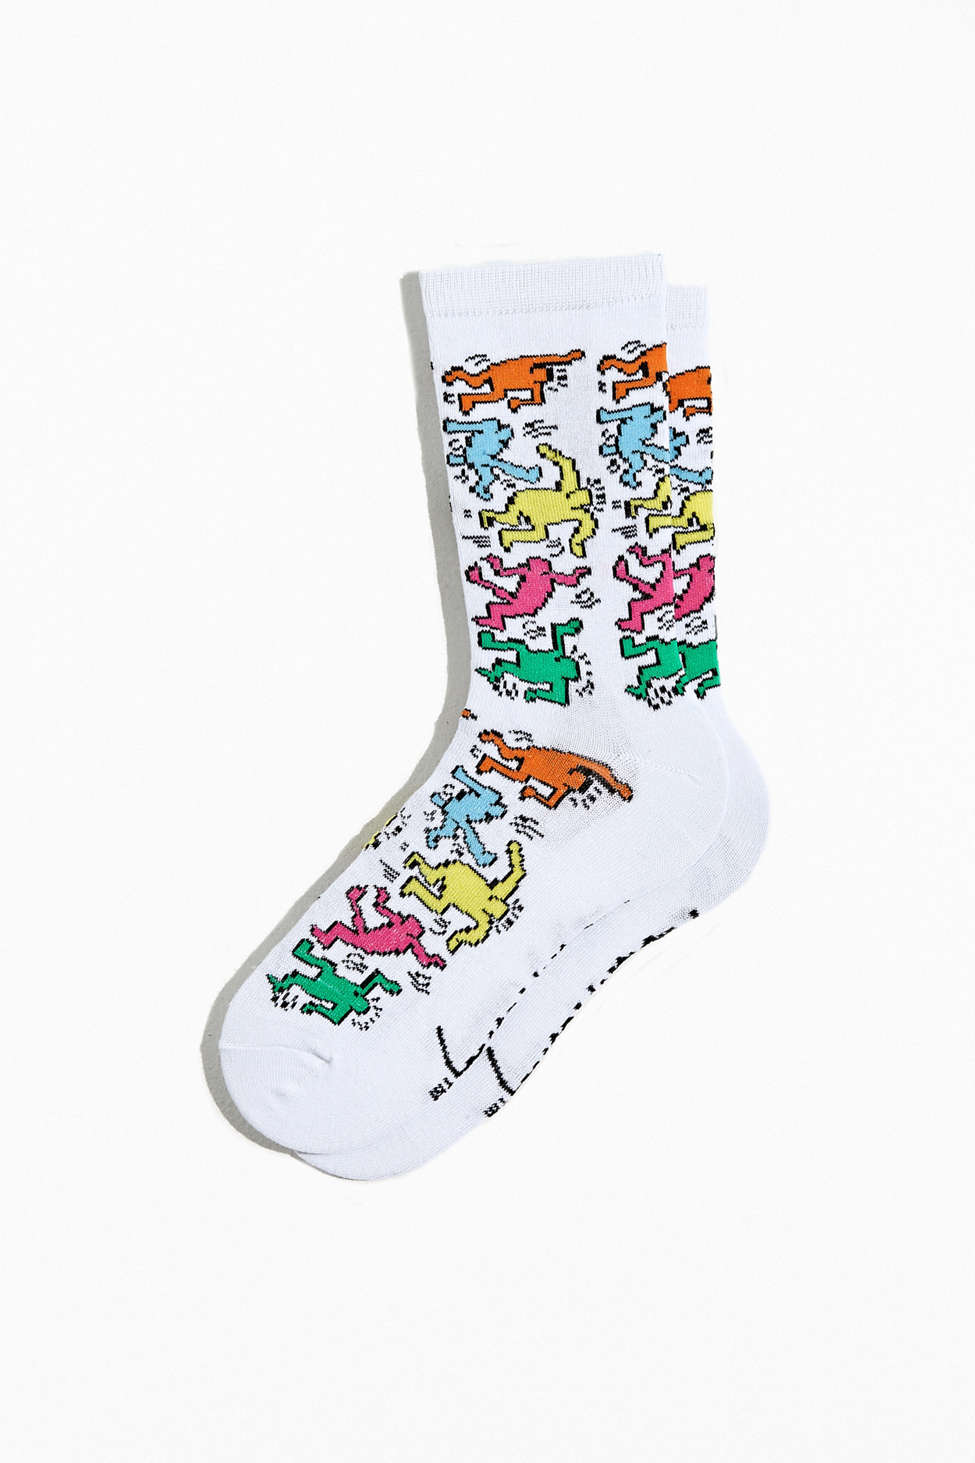 Keith Haring Dancing Figure Crew Sock Urban Outfitters & Cash Back